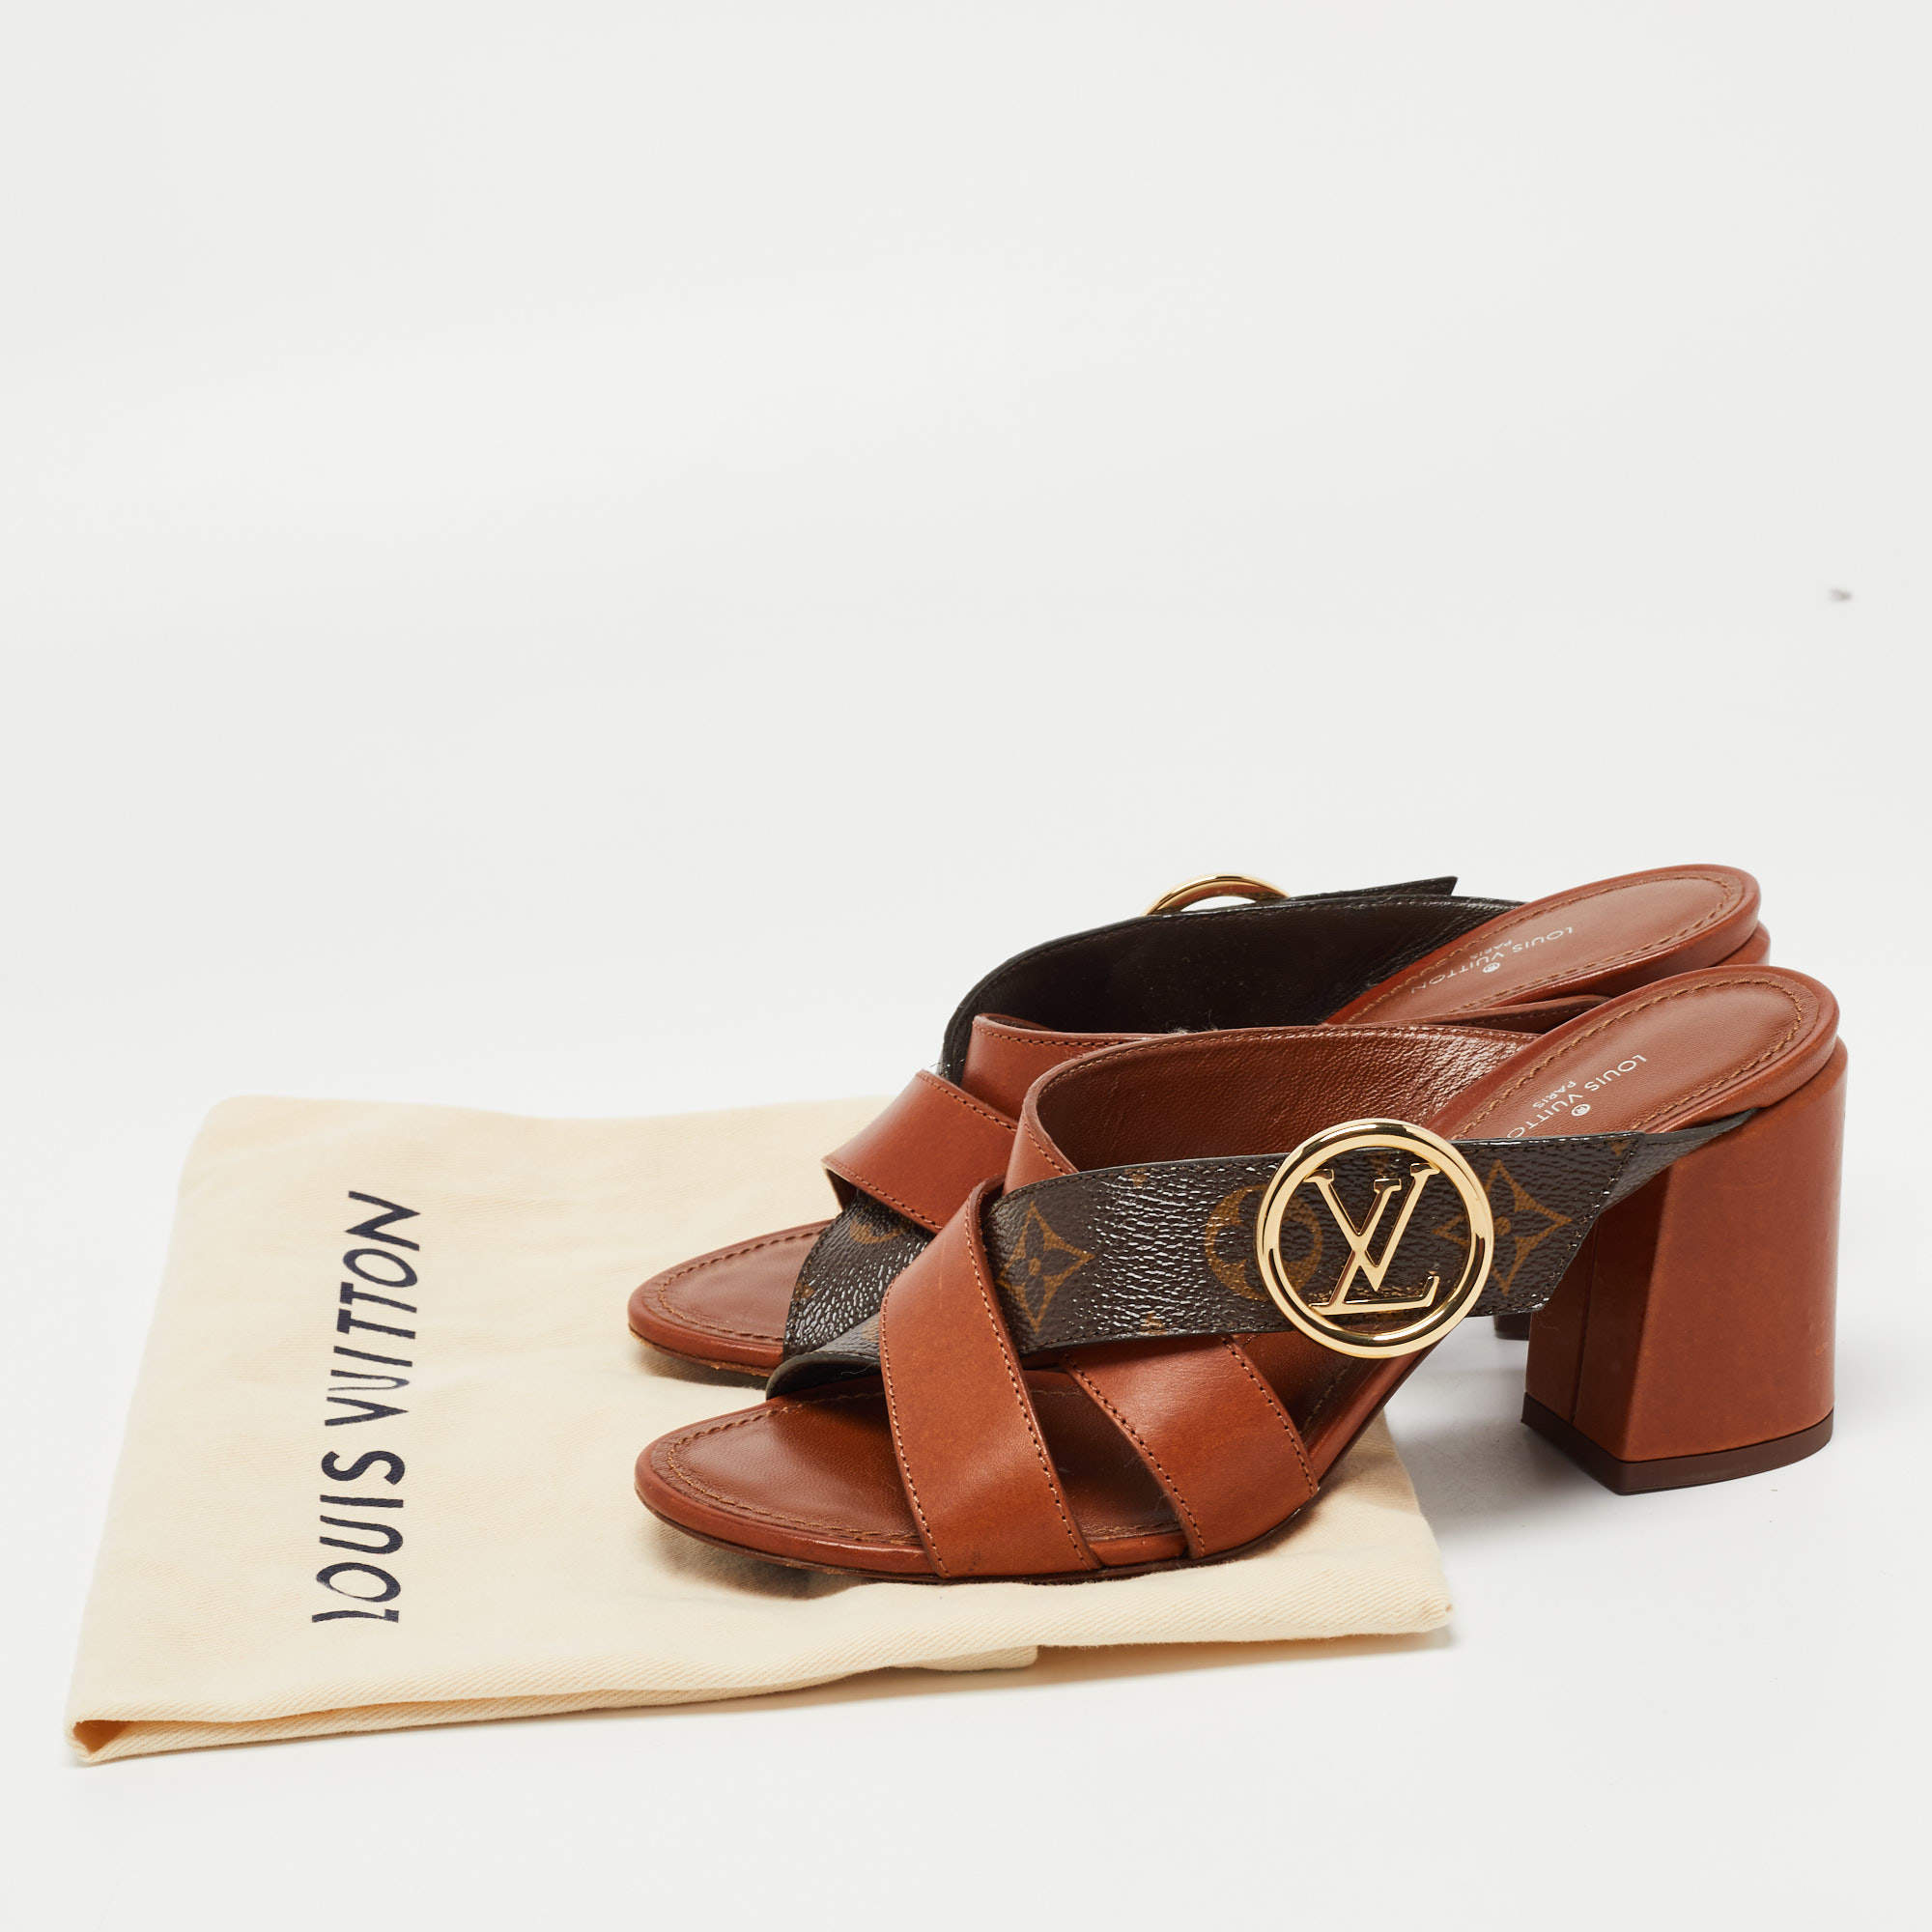 Leather sandals Louis Vuitton Brown size 8.5 UK in Leather - 24528897